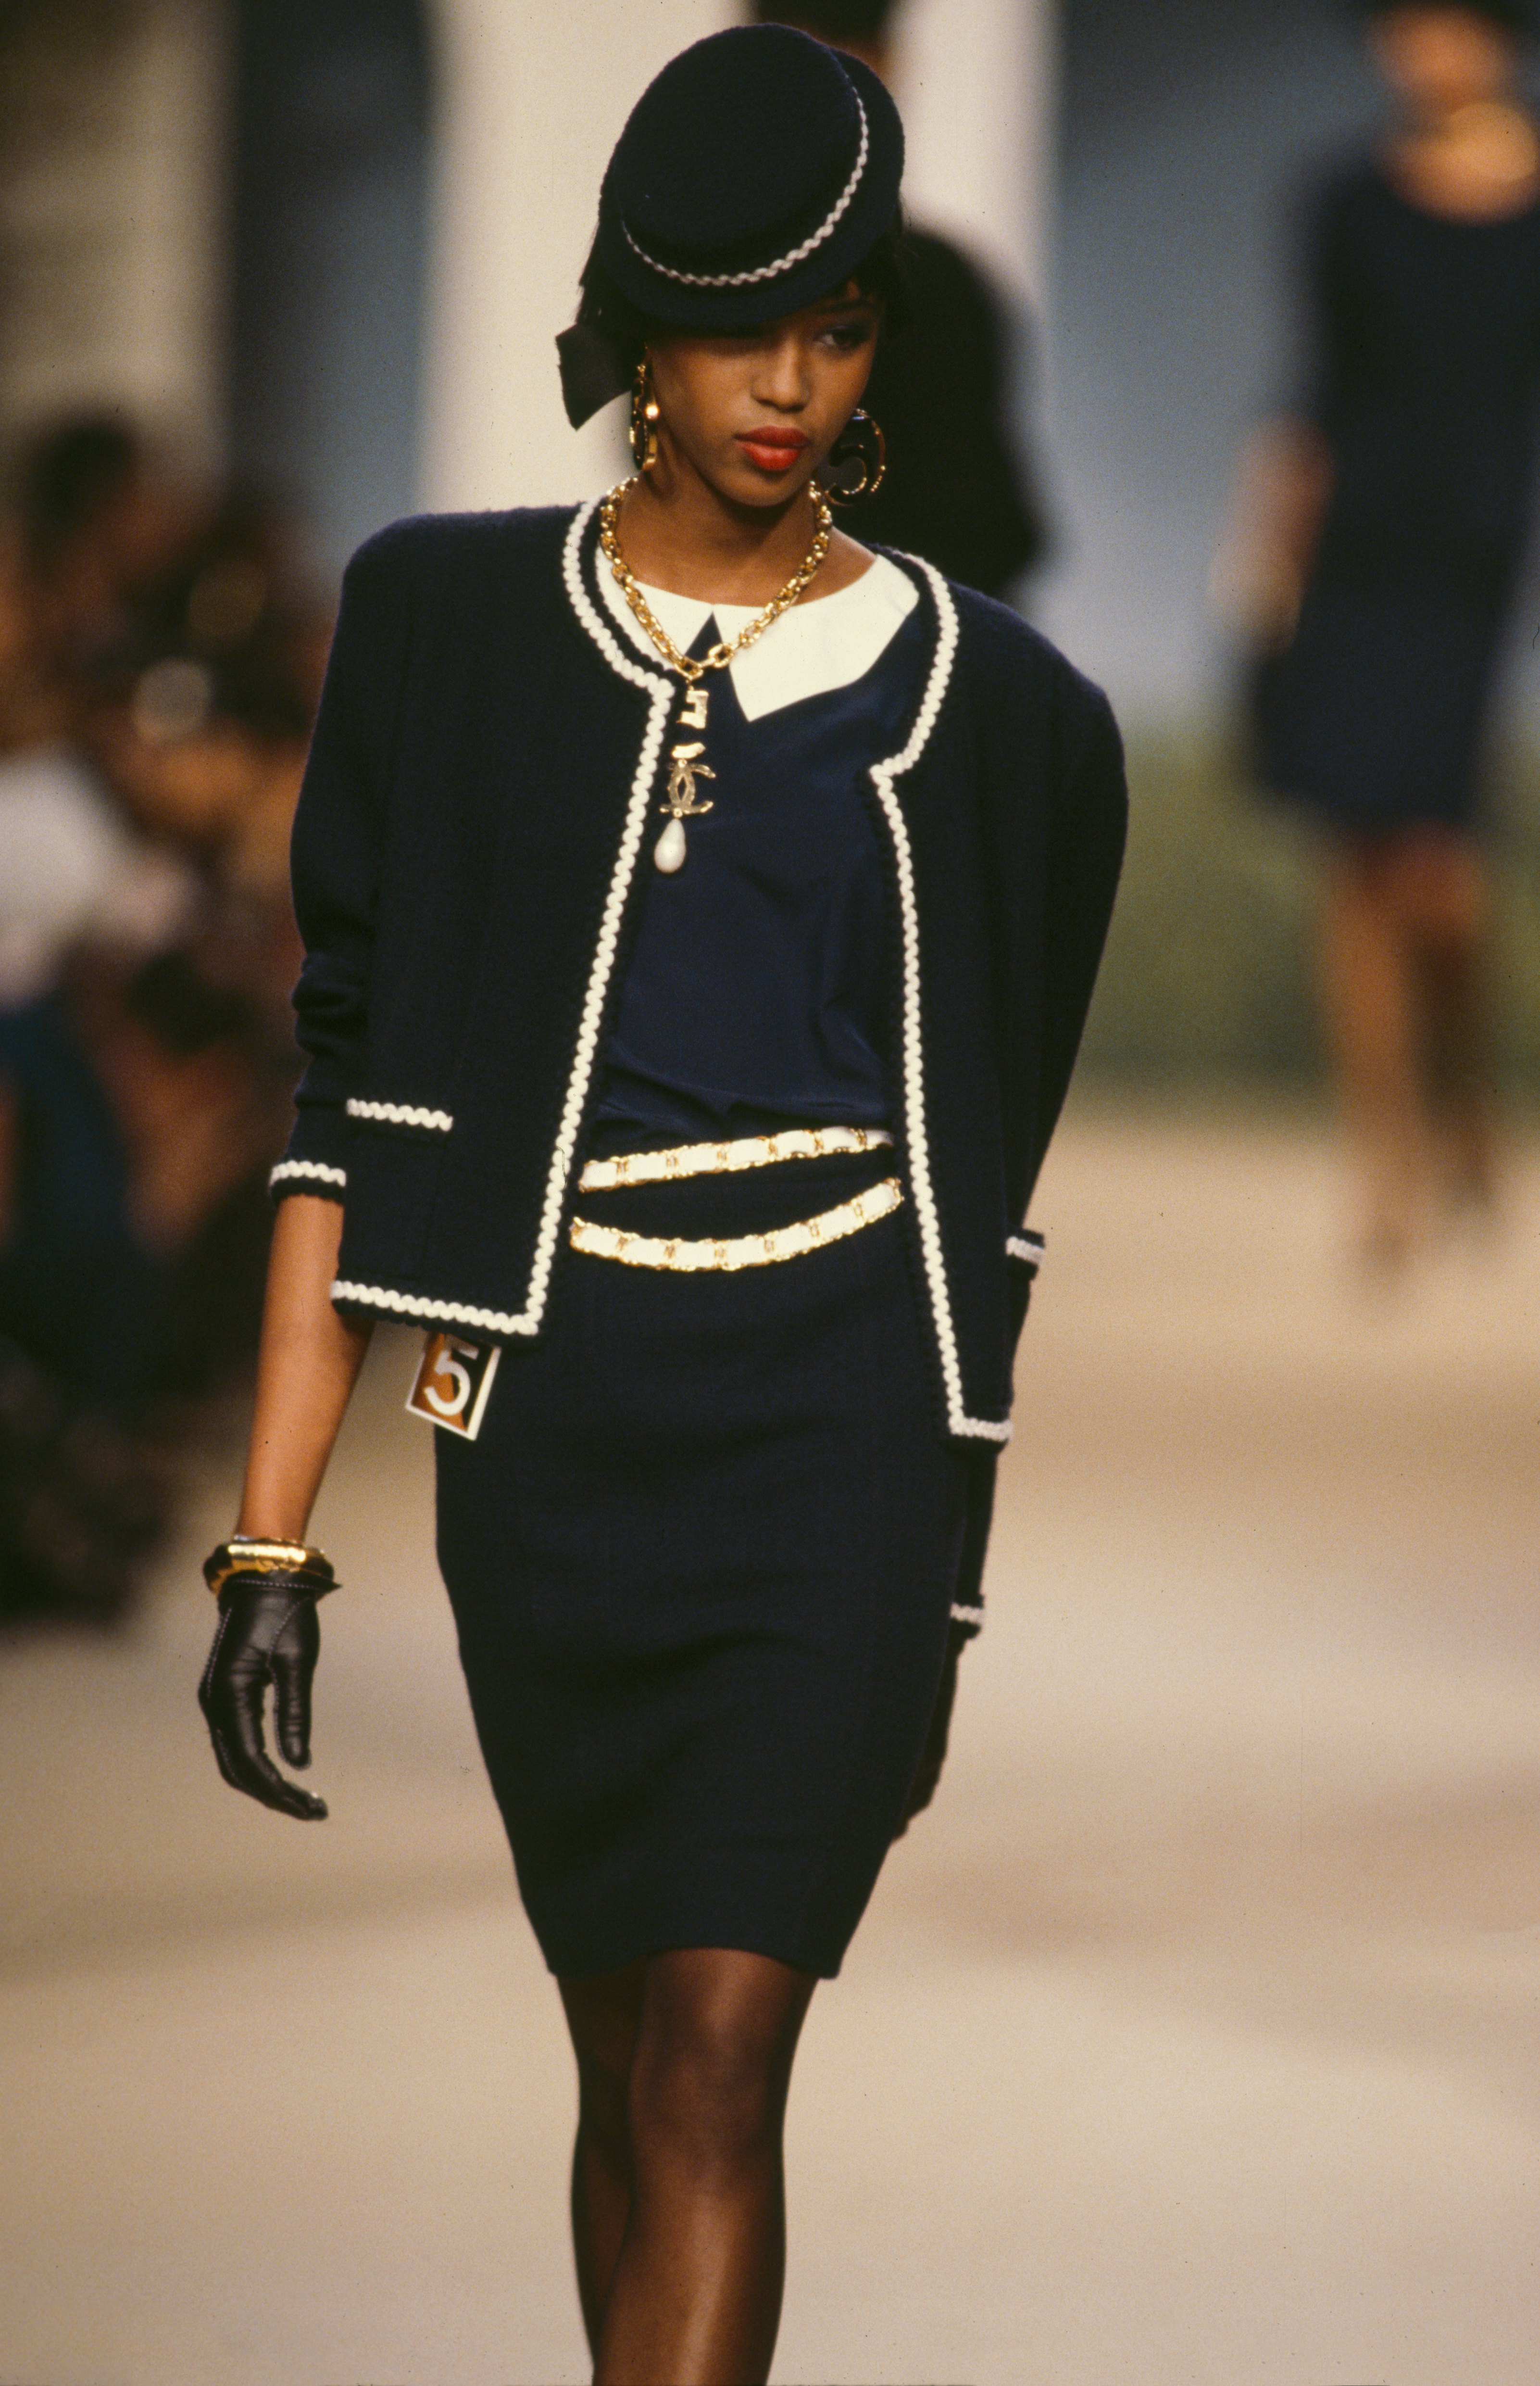 A History Of Chanel  From Its Beginnings To The Most Iconic Looks